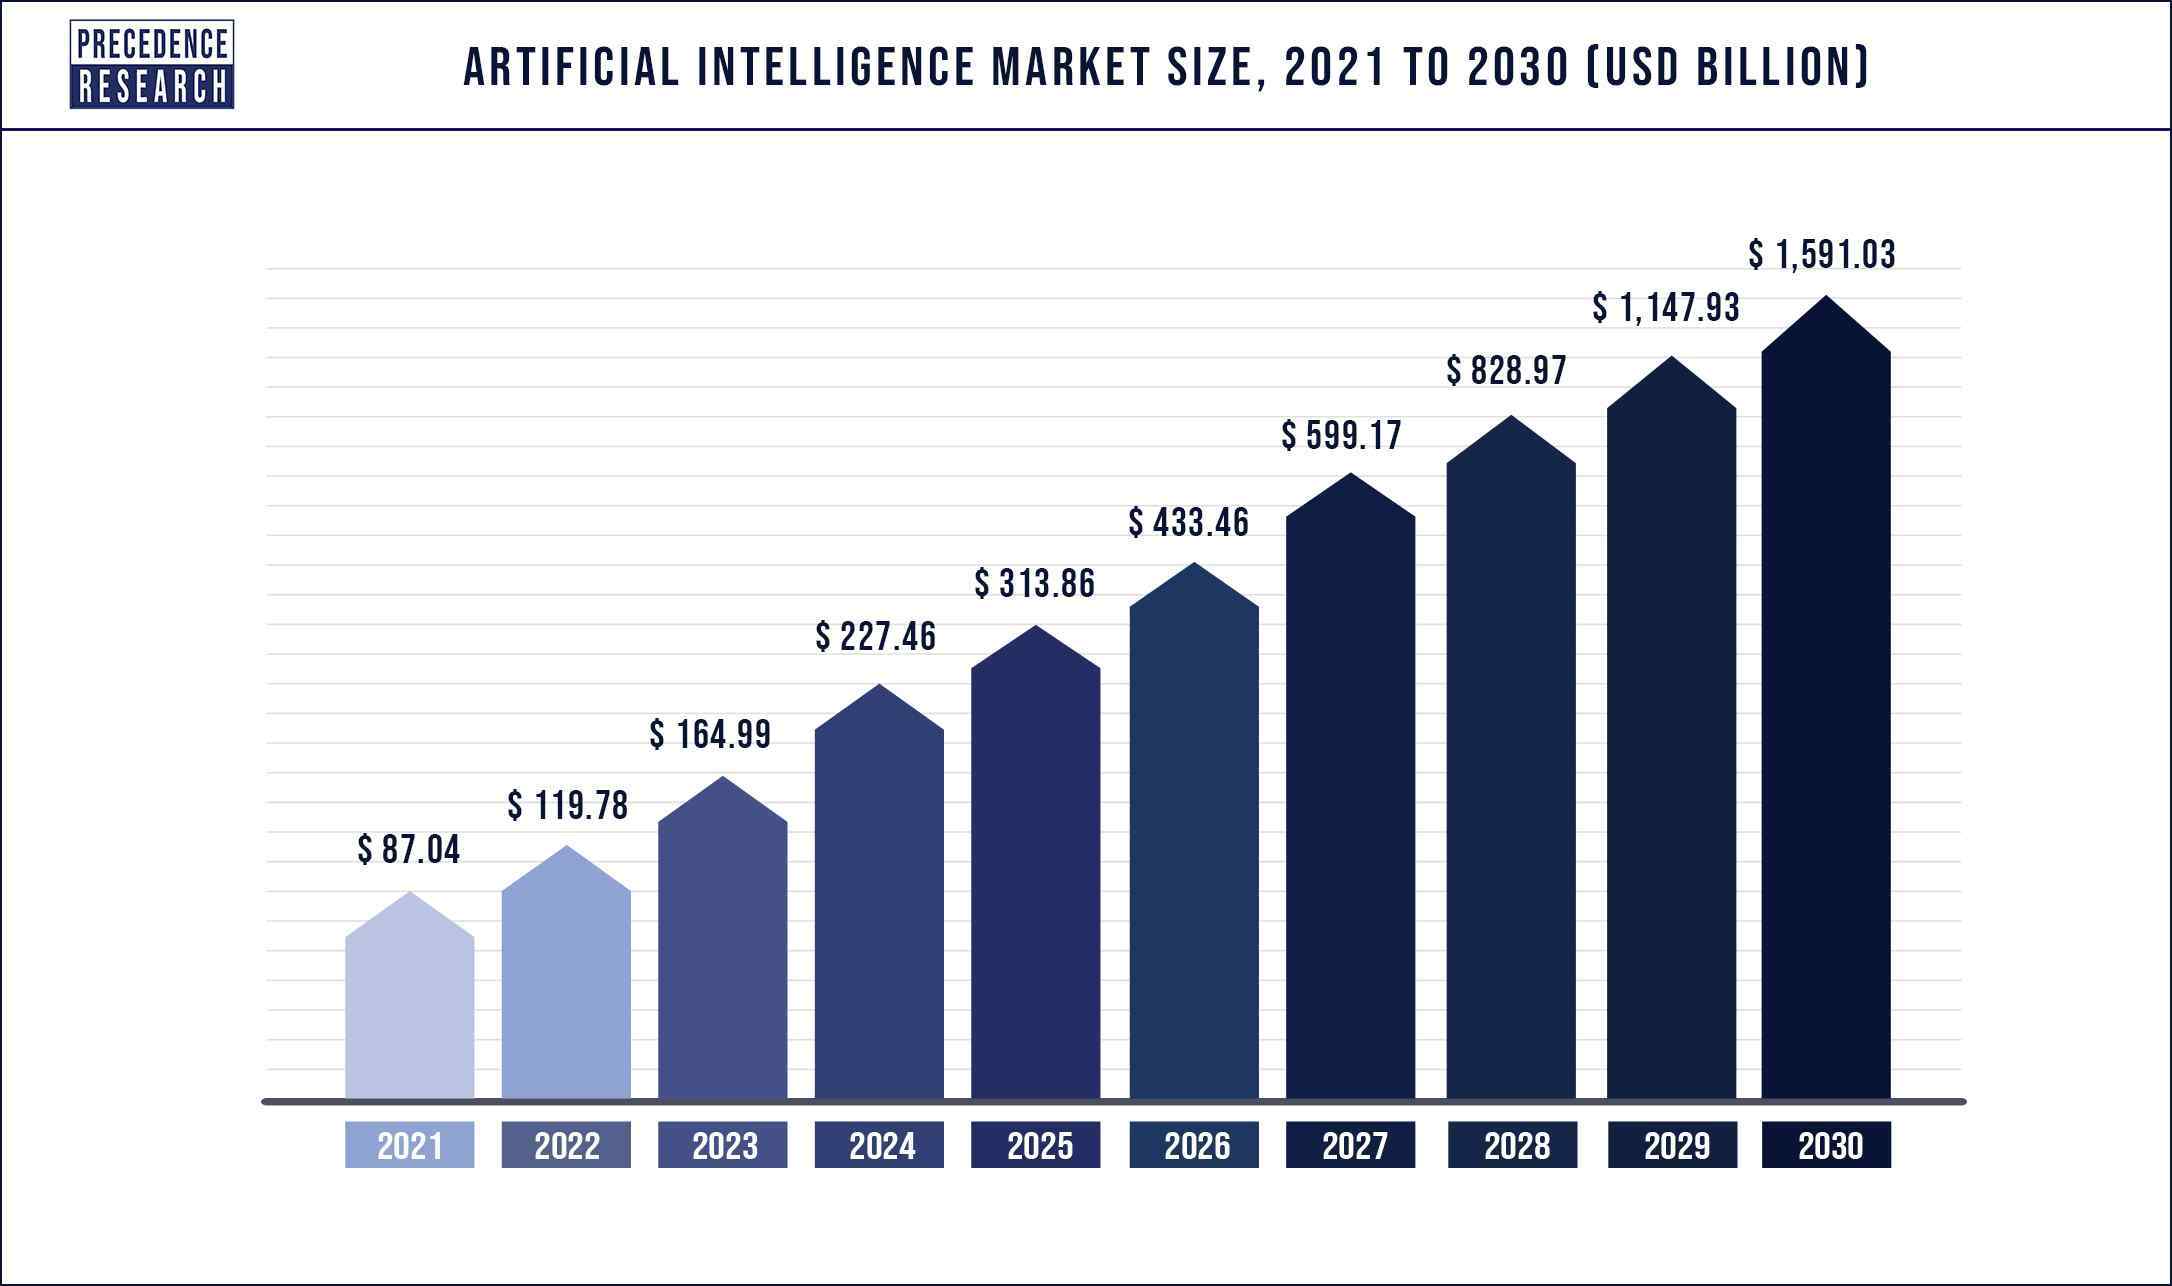 bar graph shows how artificial intelligence market will grow until 2030